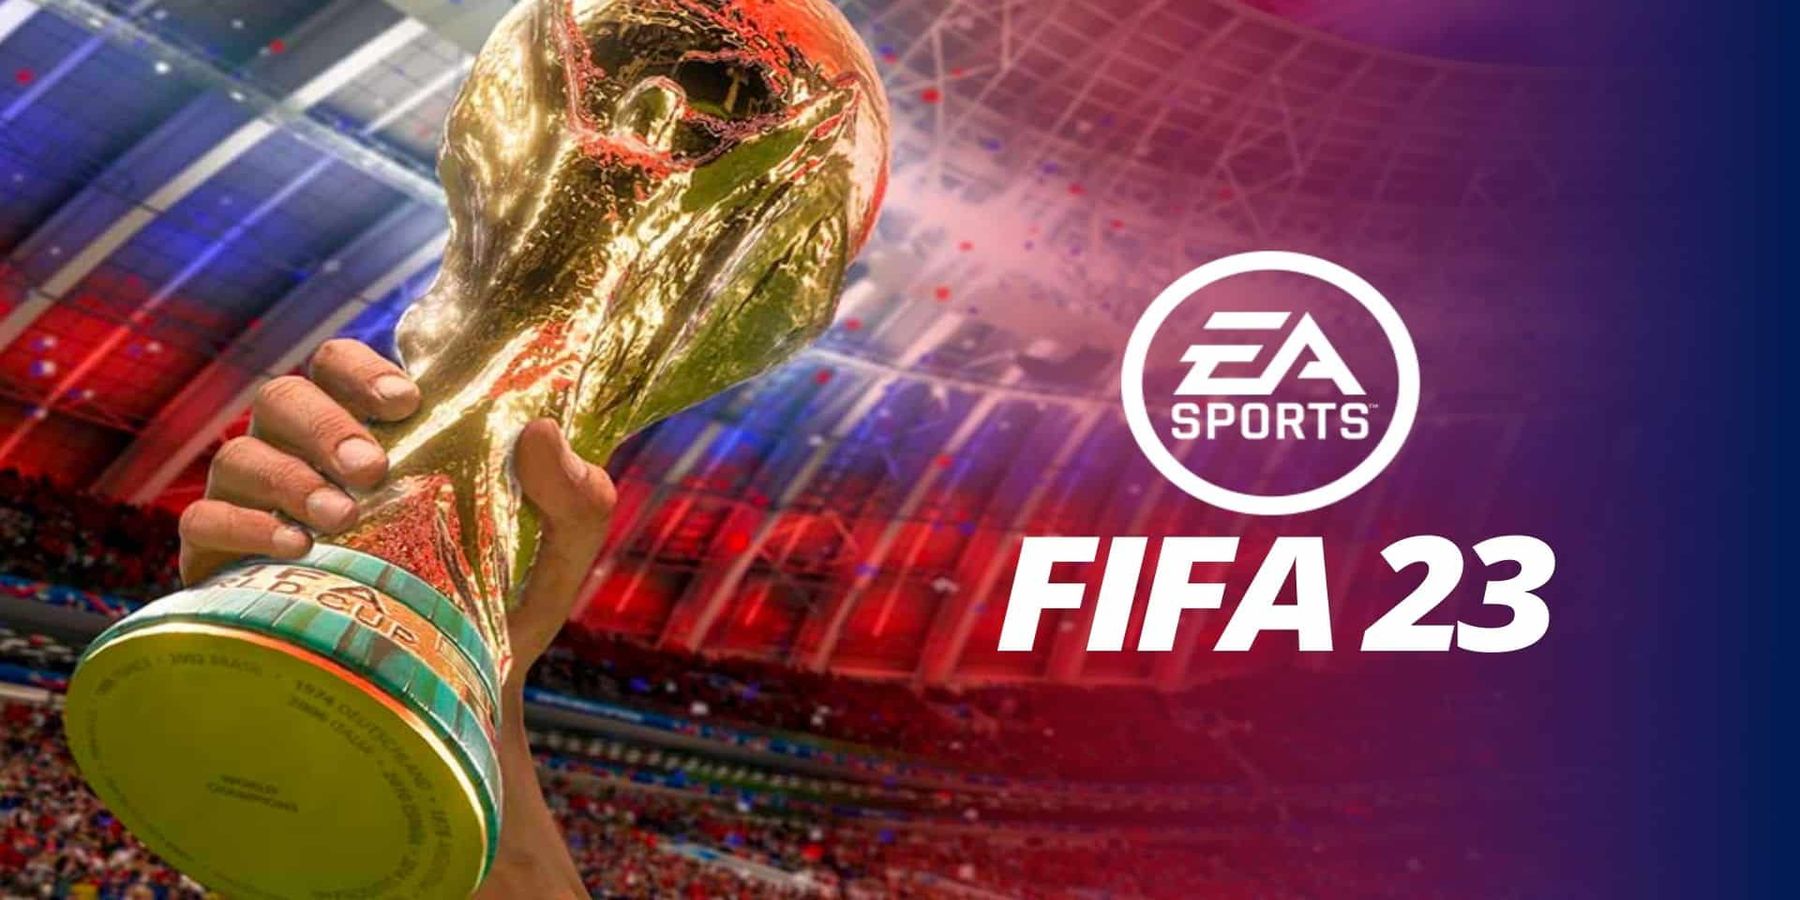 FIFA 23 To Introduce Cross-Play Between Consoles And PC